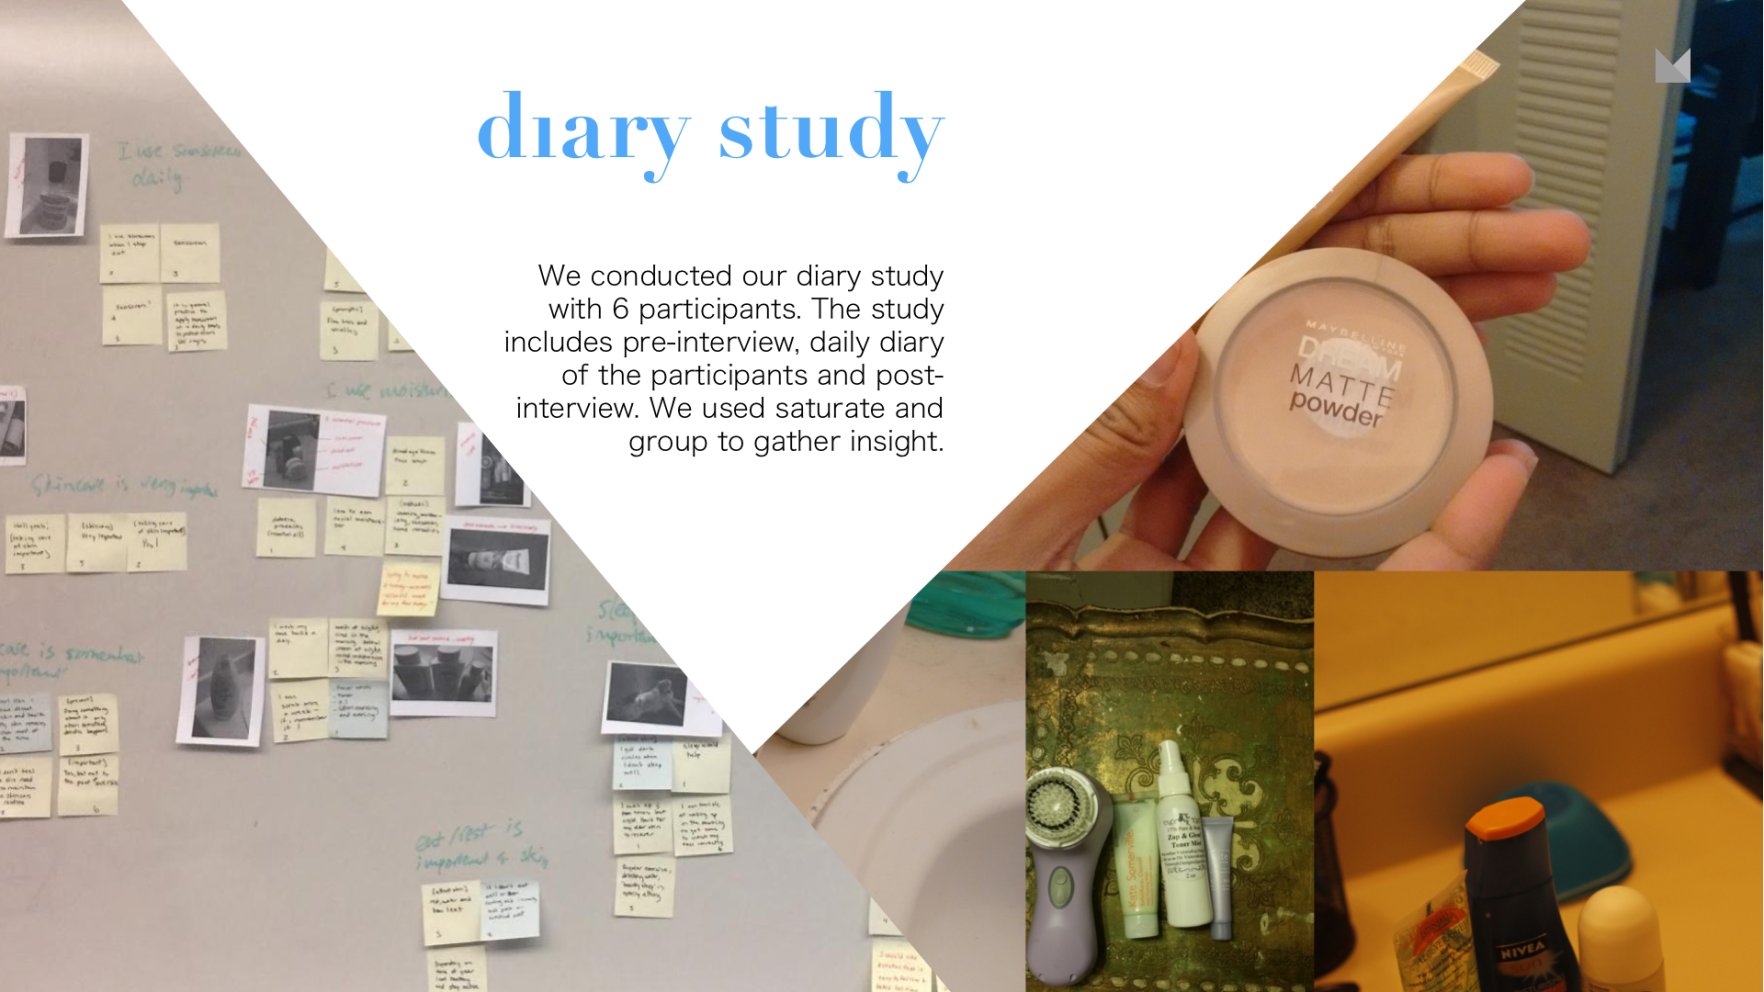 Diary Study.  We conducted a diary study with 6 participants.  The study included pre and post interviews and daily diary entries.  We used saturate and group to gather insight.